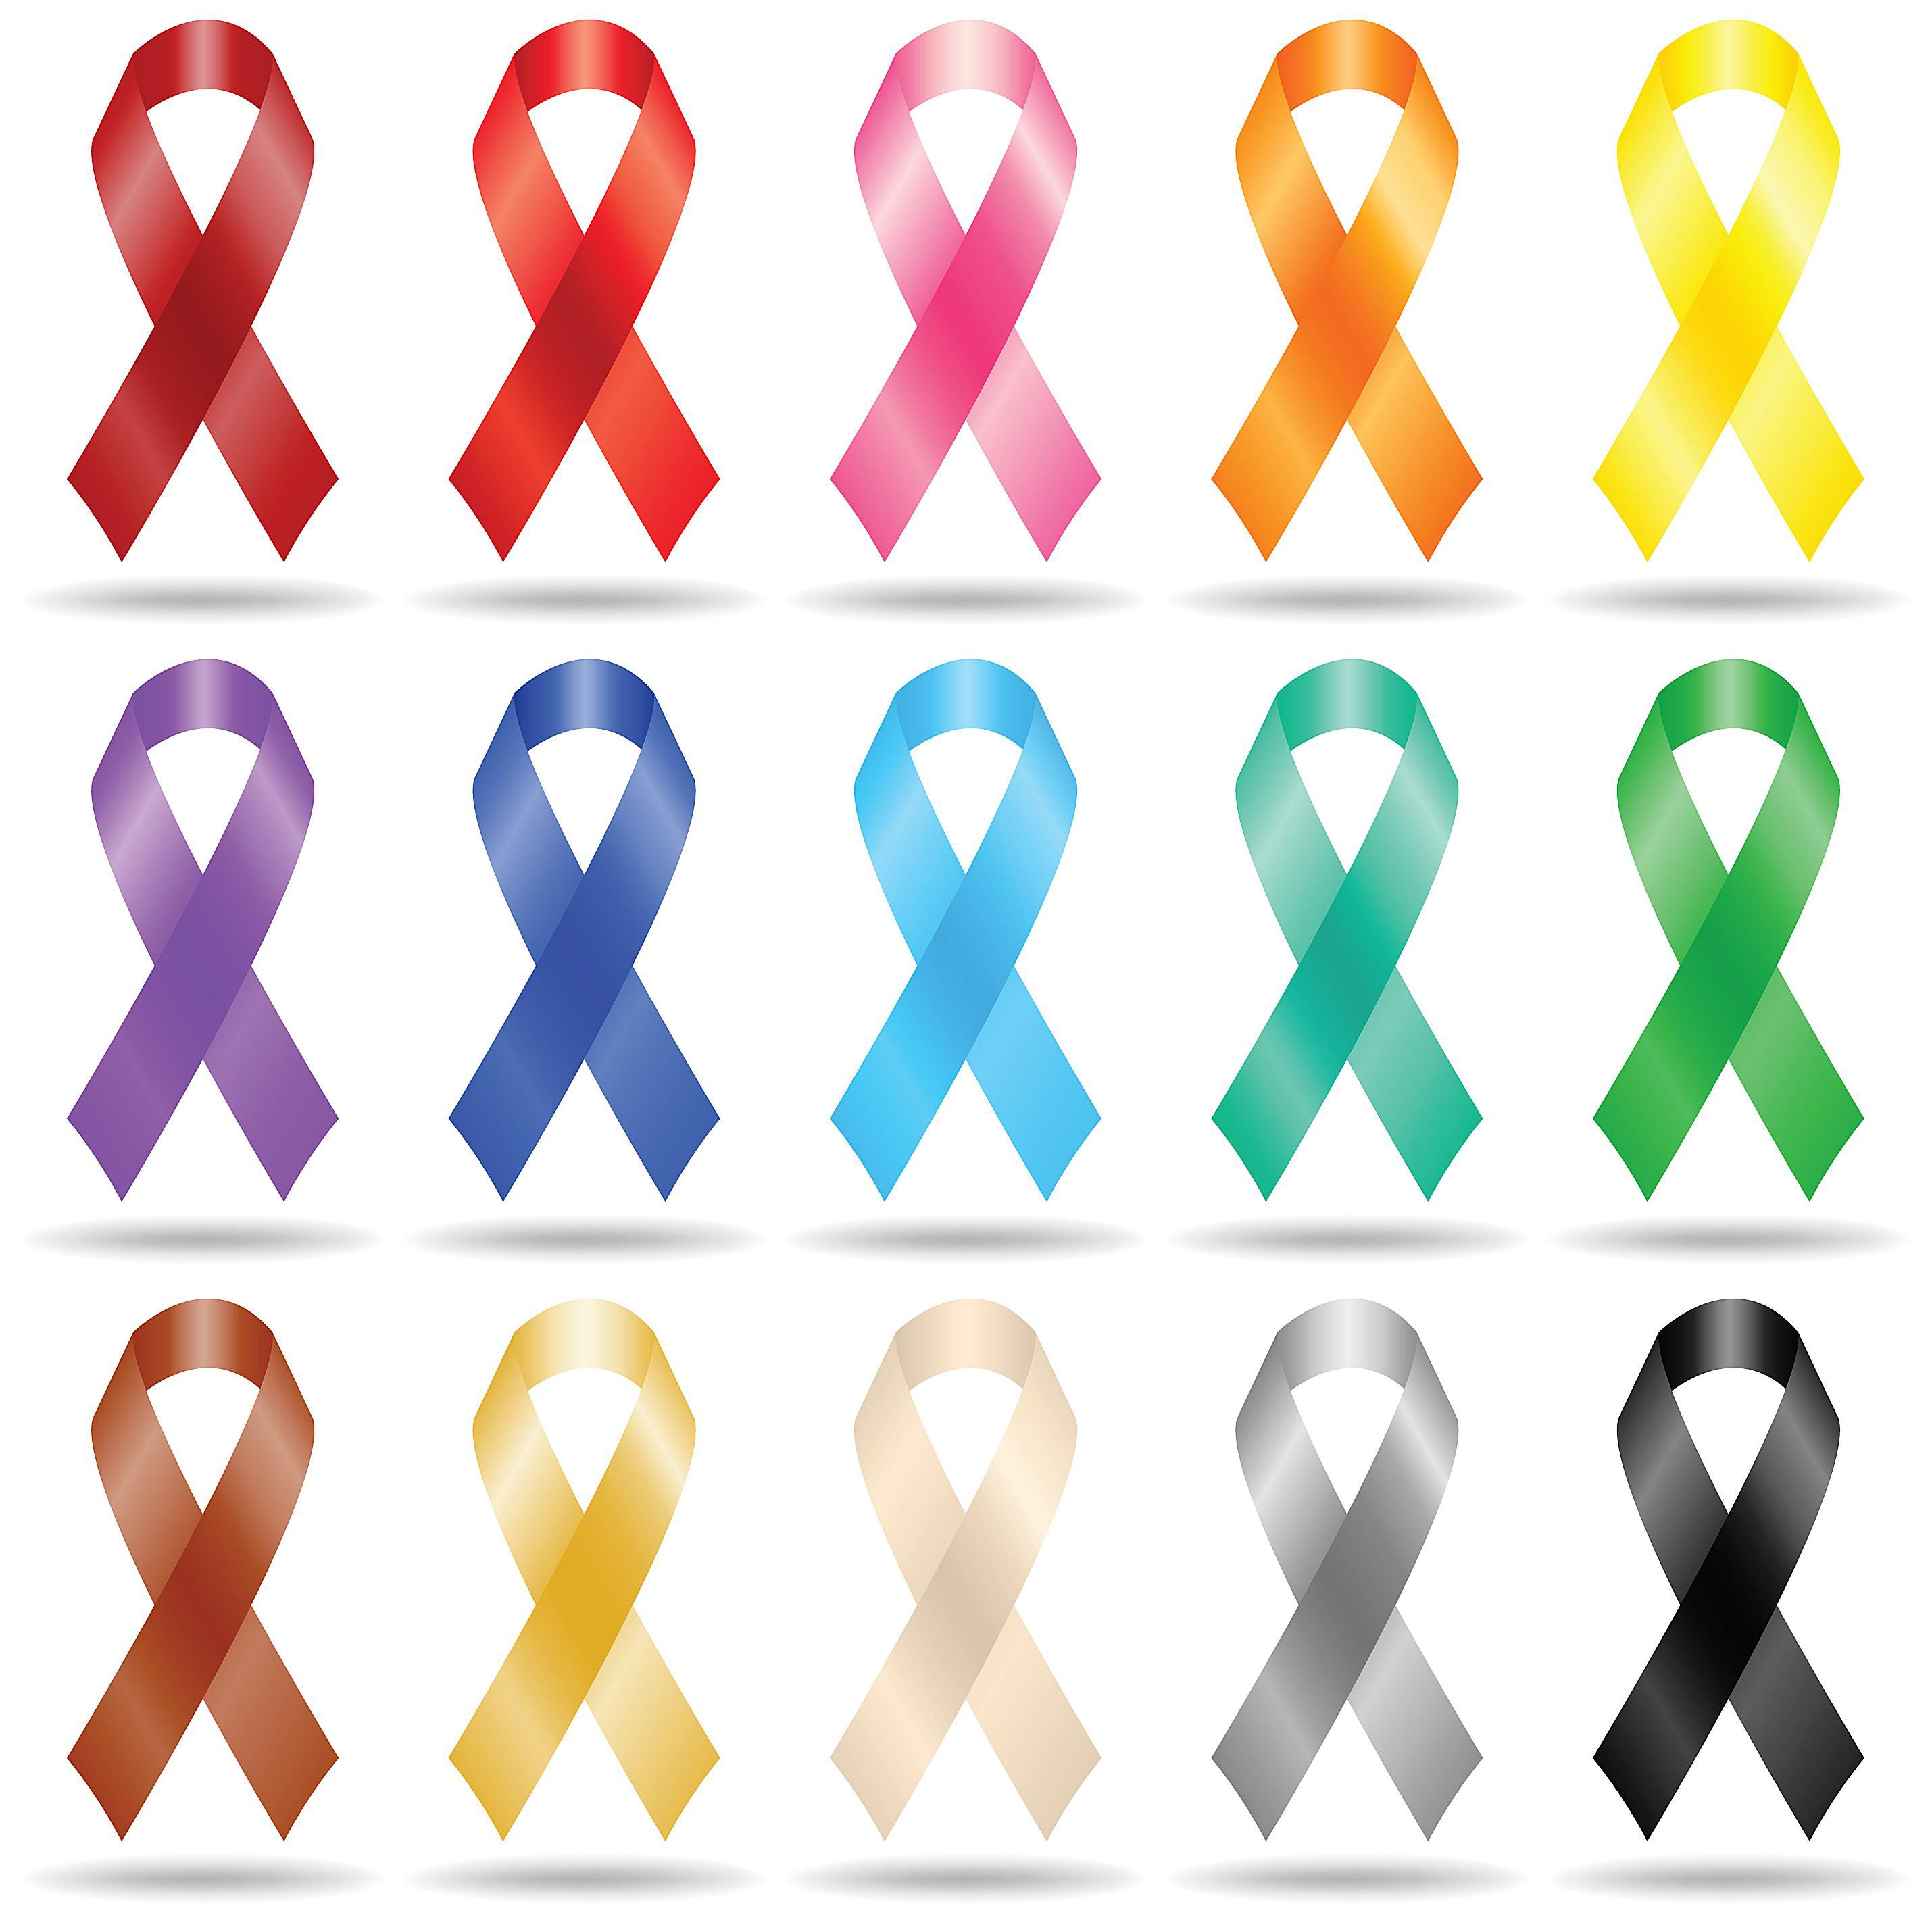 list-of-colors-and-months-for-cancer-ribbons